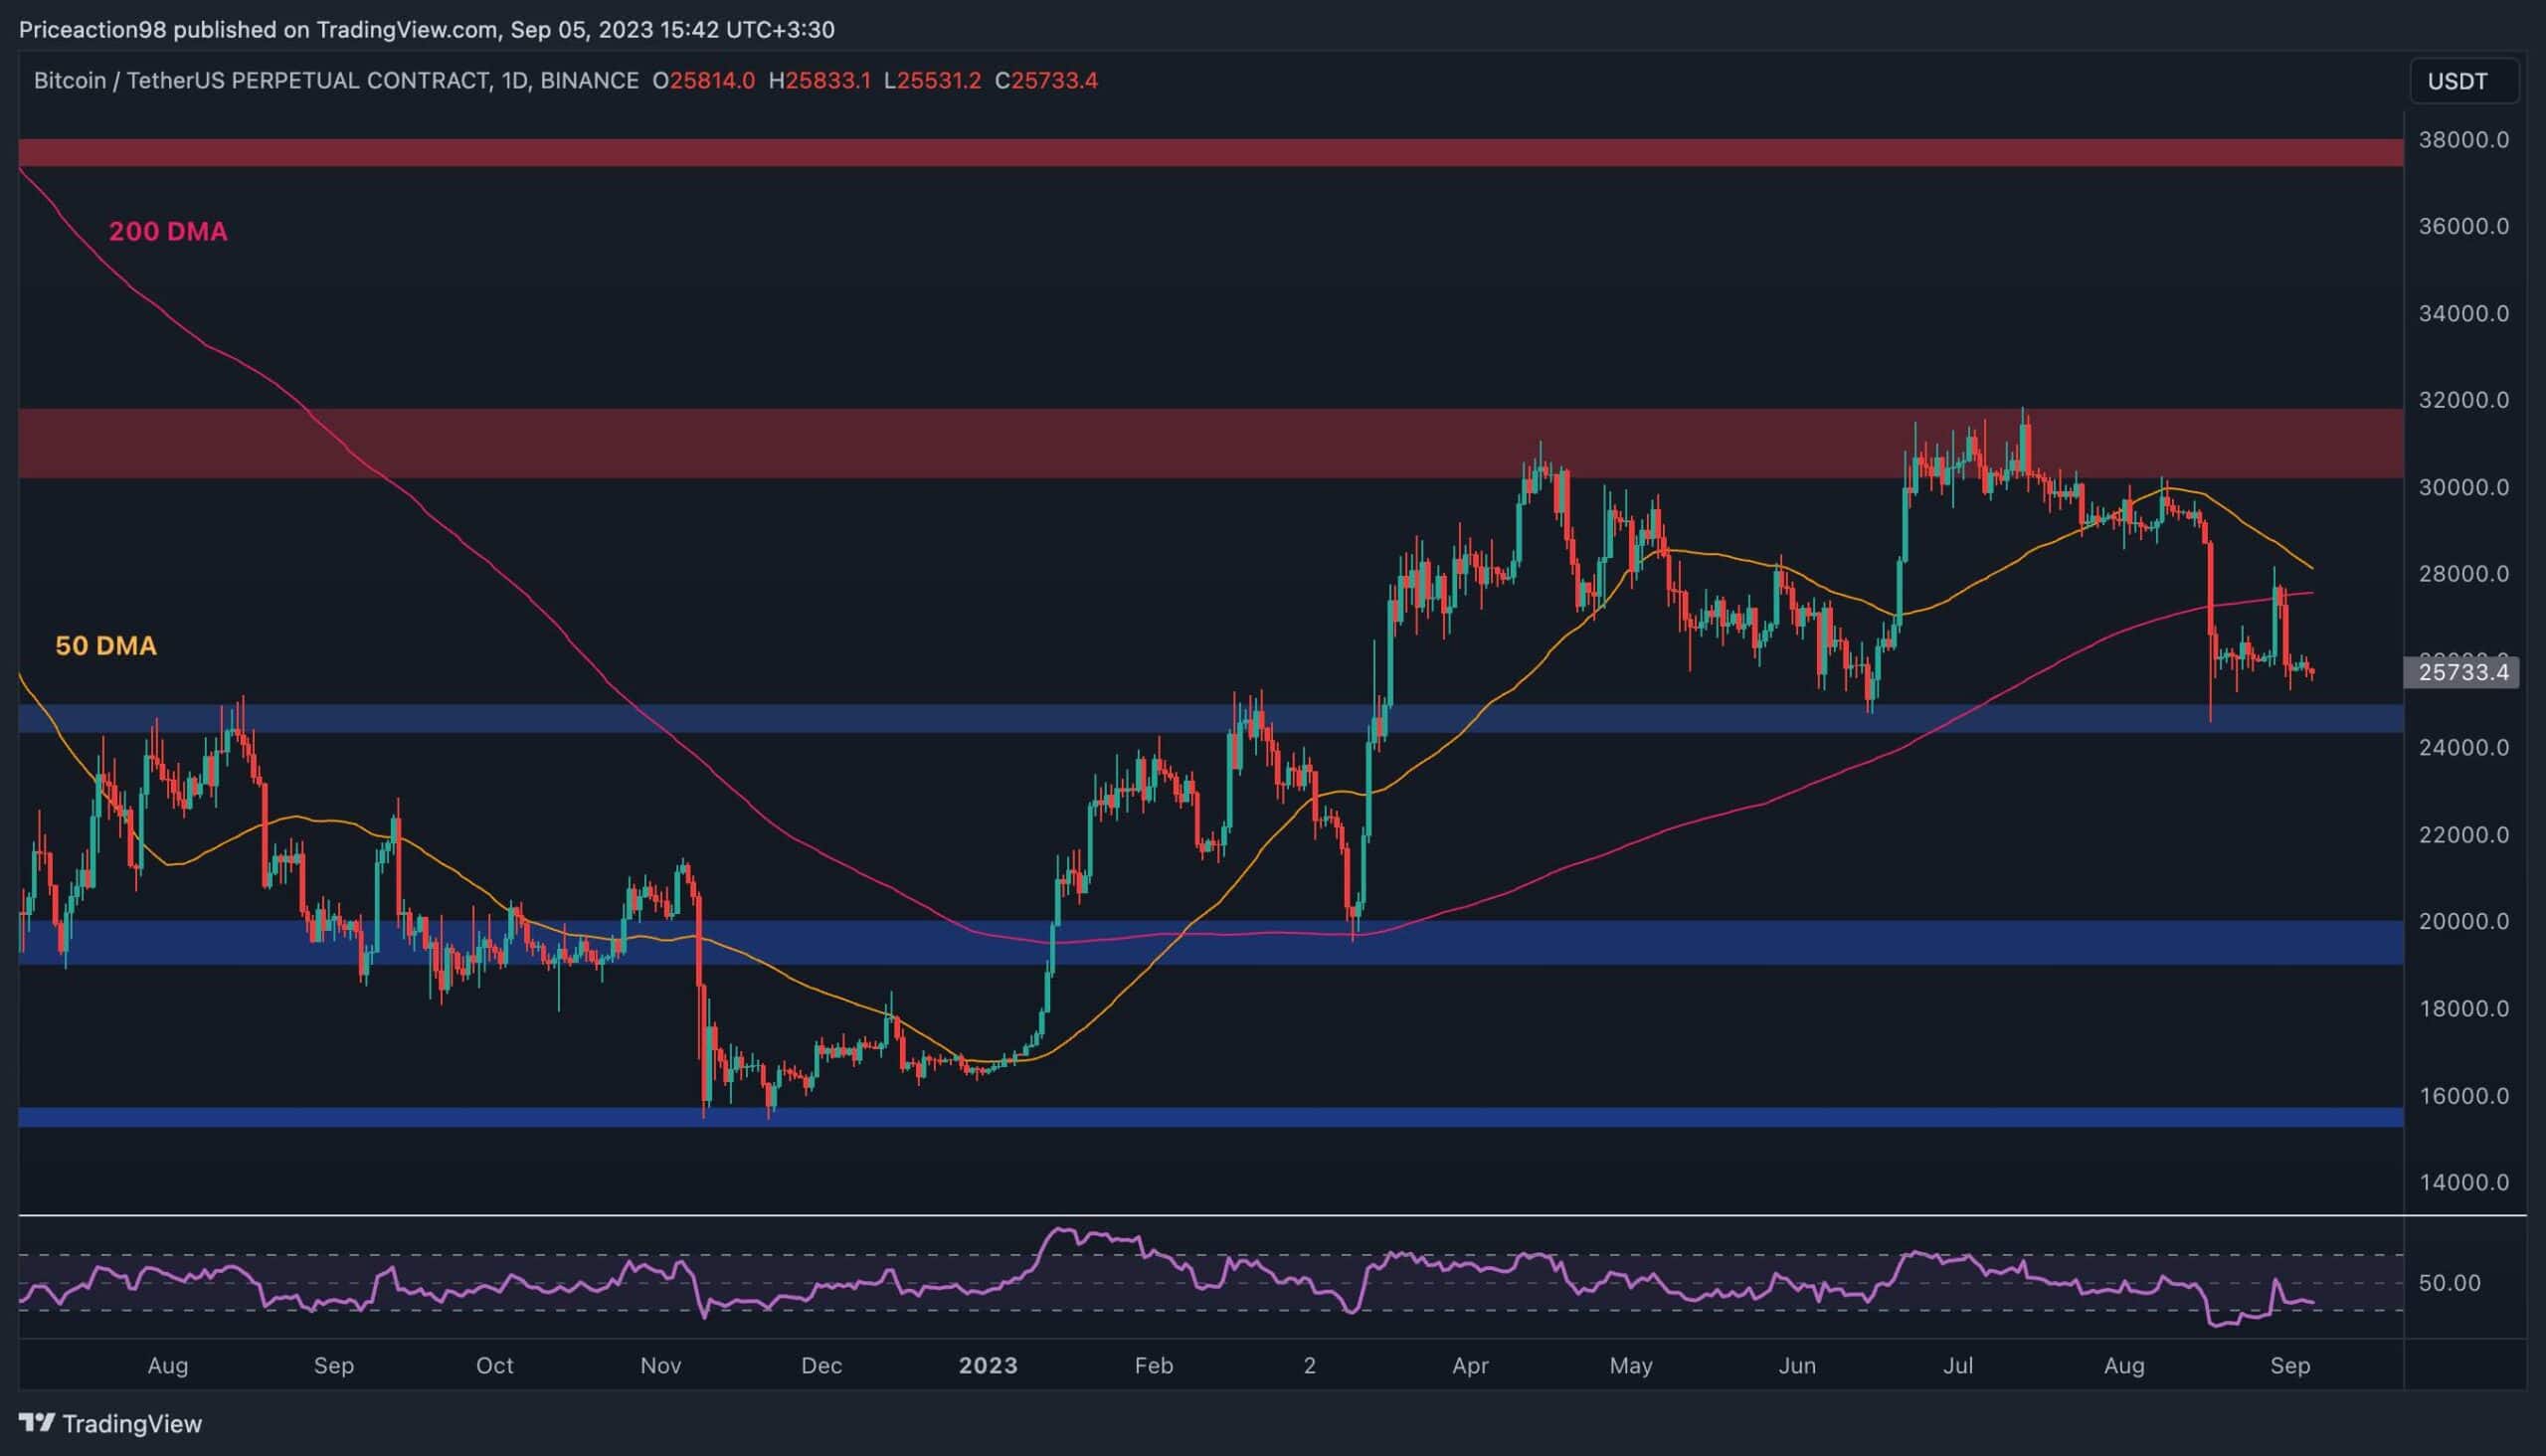 Here’s the First Level of Support if K Fails to Hold BTC (Bitcoin Price Analysis)